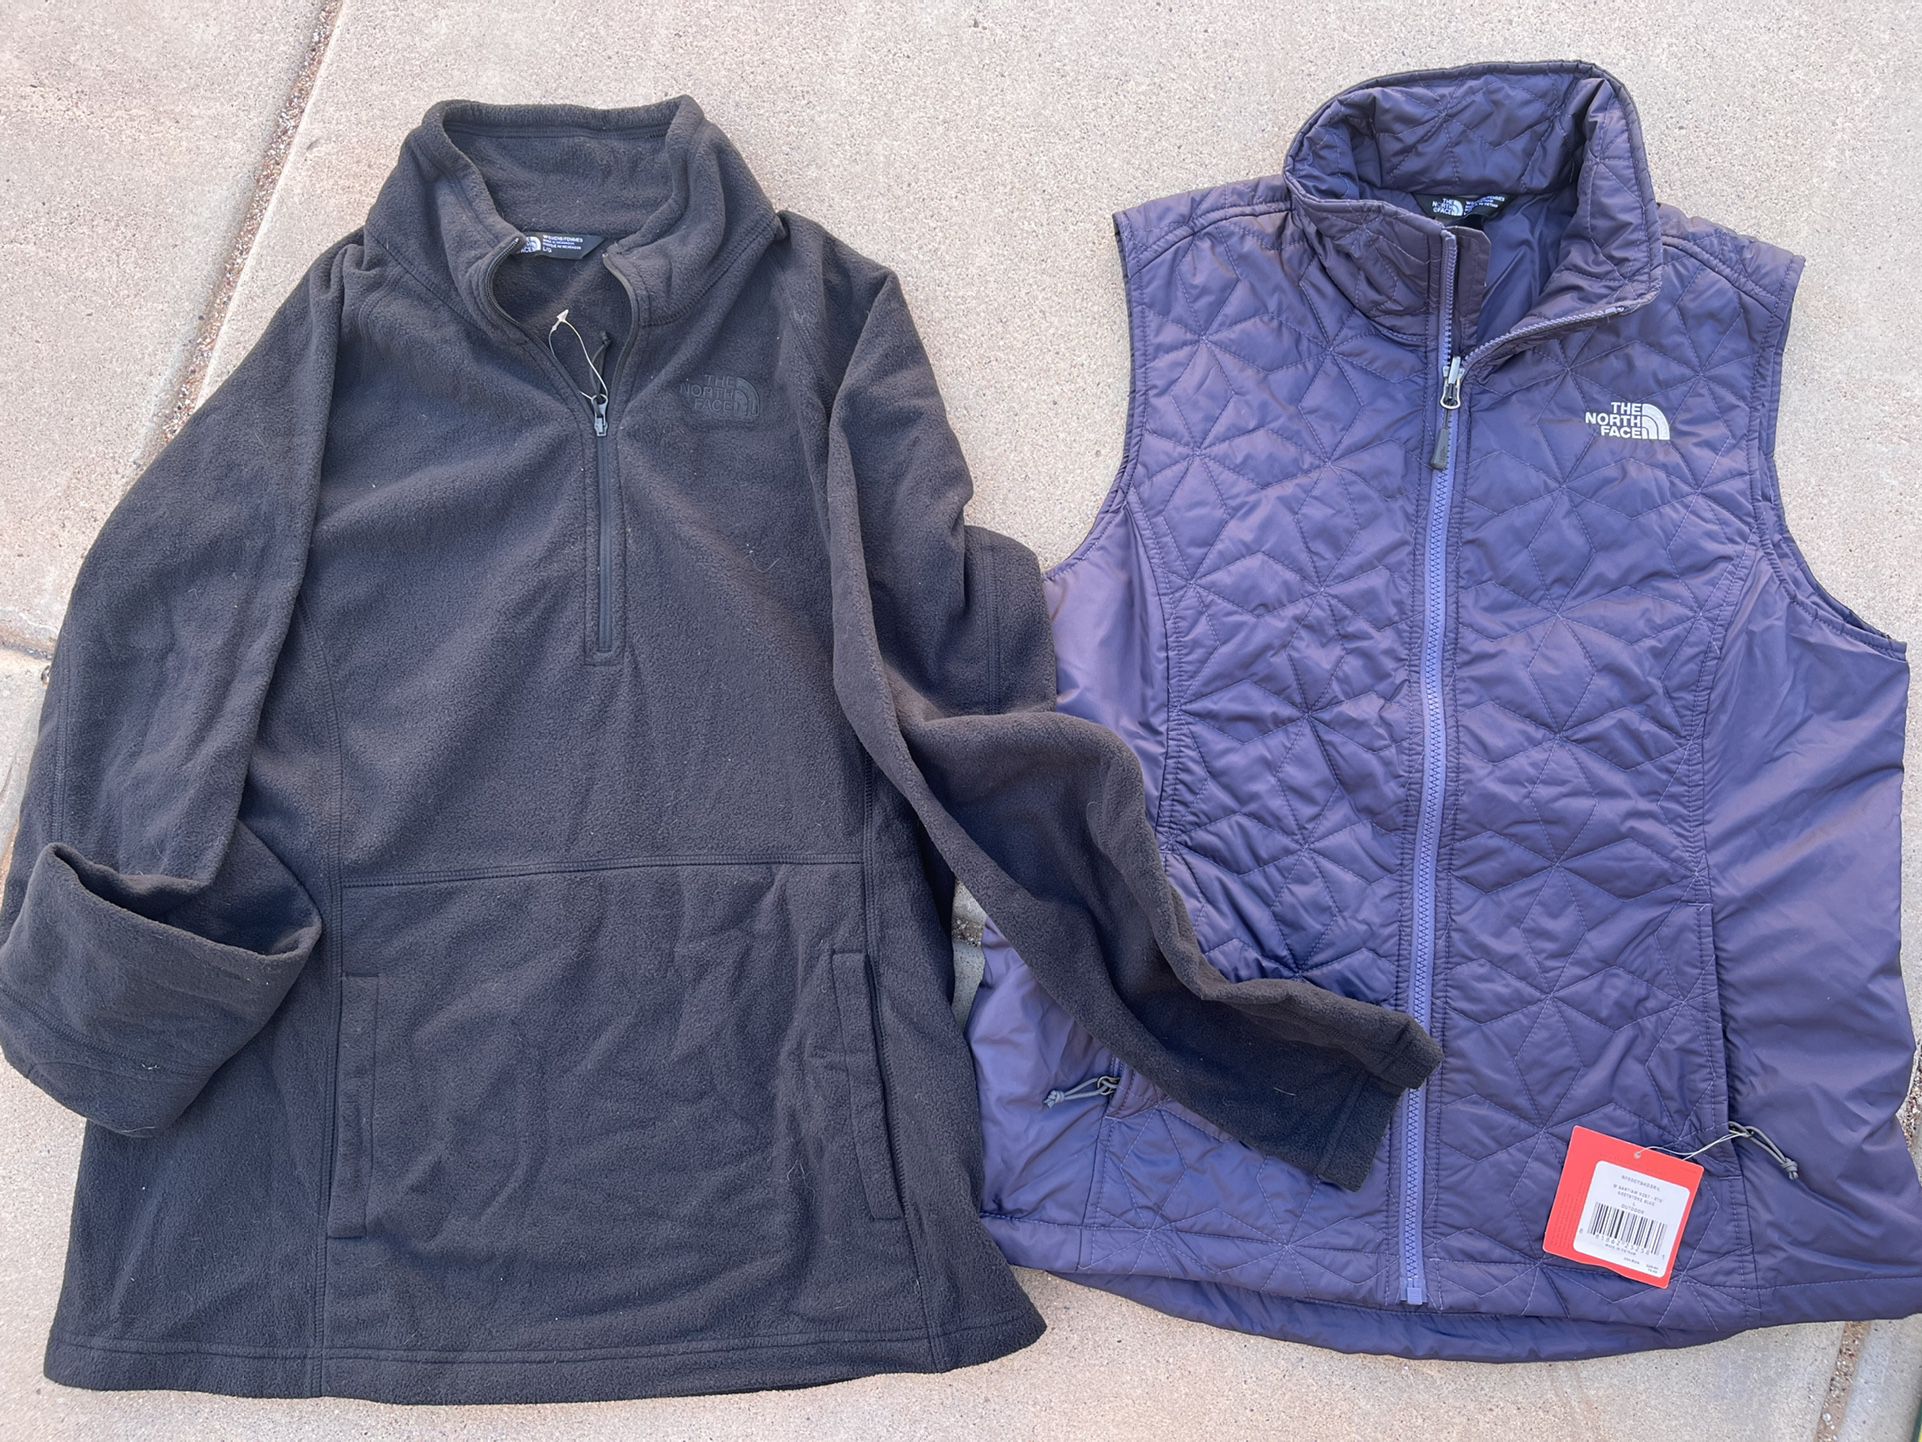 North Face Vest and Sweater 